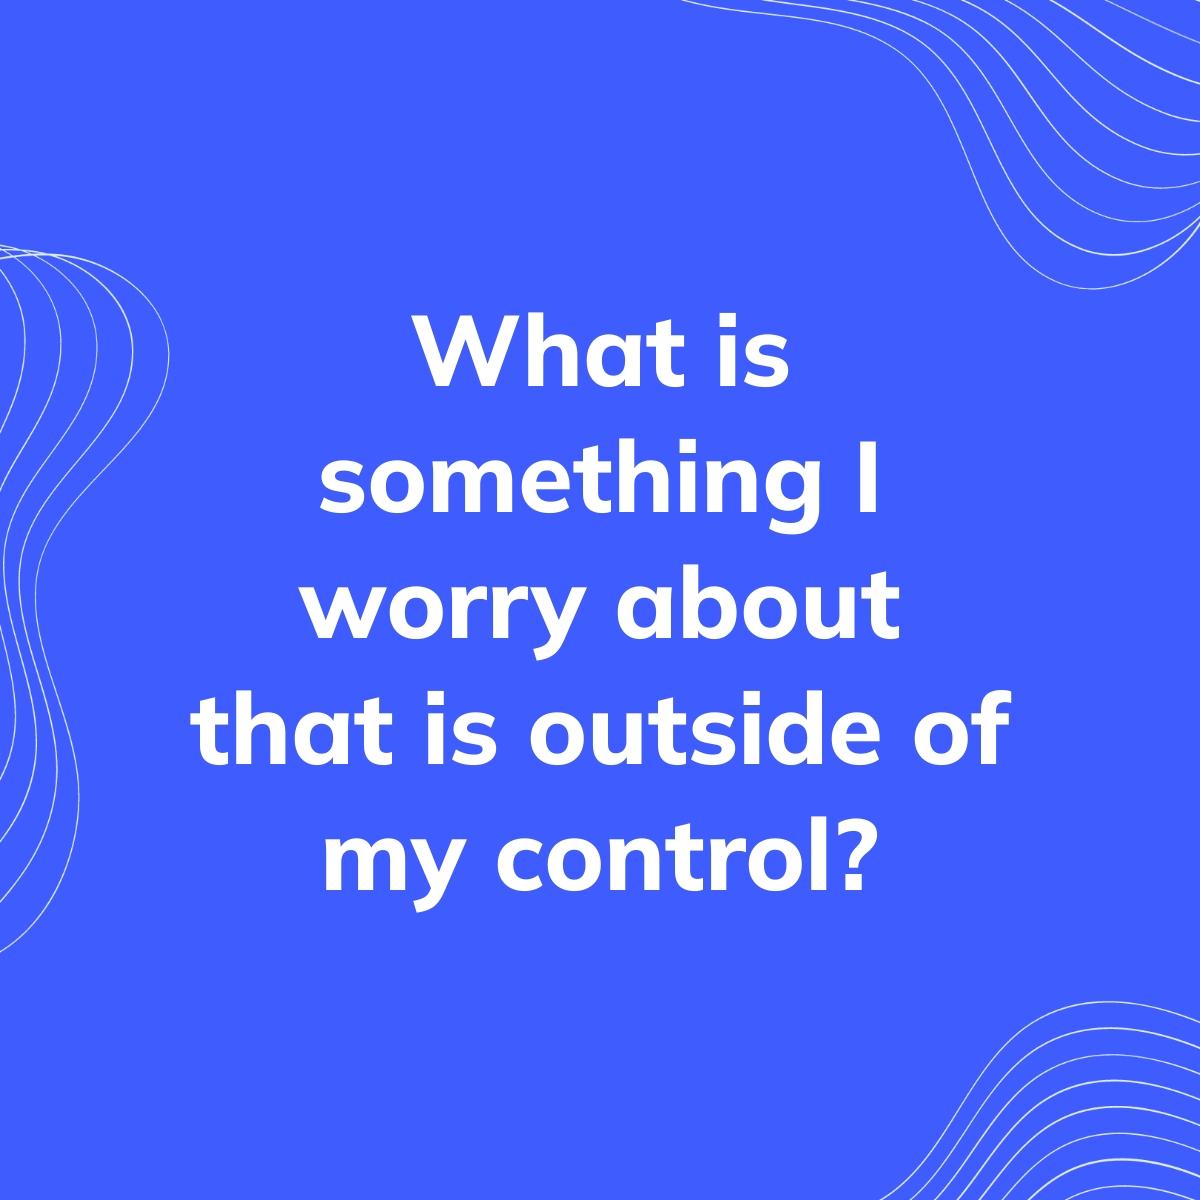 Journal Prompt: What is something I worry about that is outside of my control?